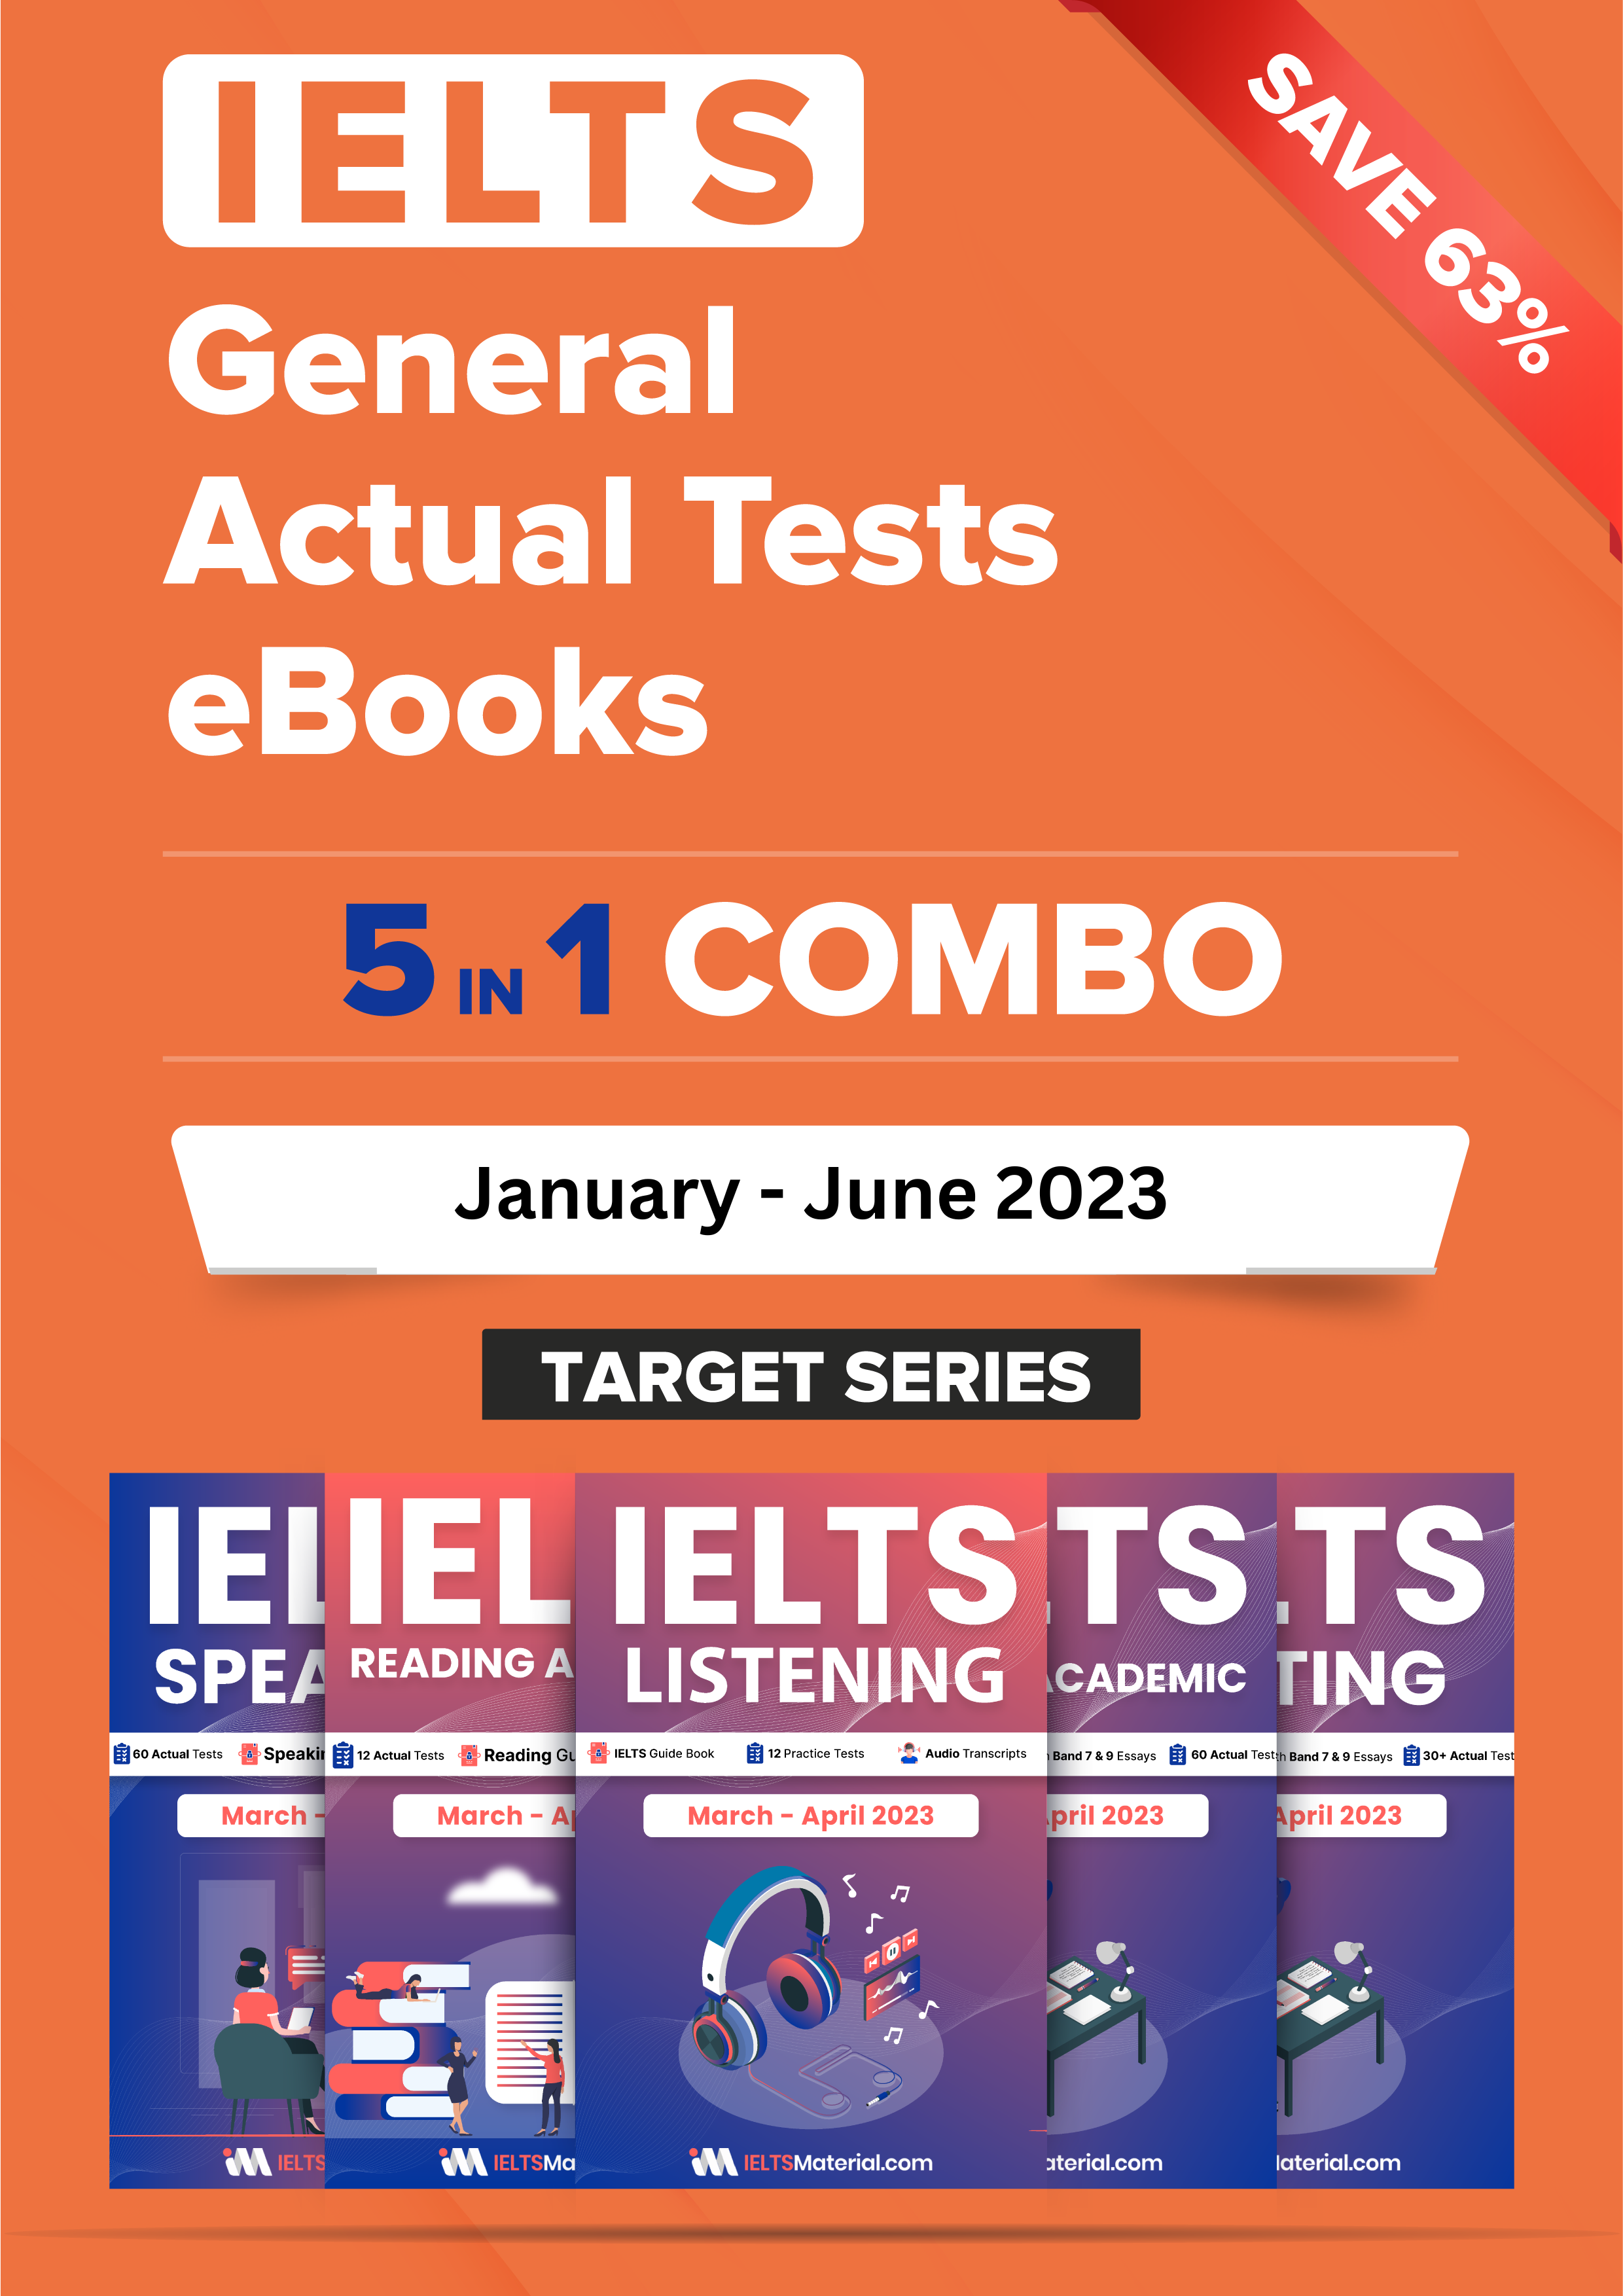 IELTS Reading General: Learner’s Kit: Actual Tests eBook Combo (January - June 2023)